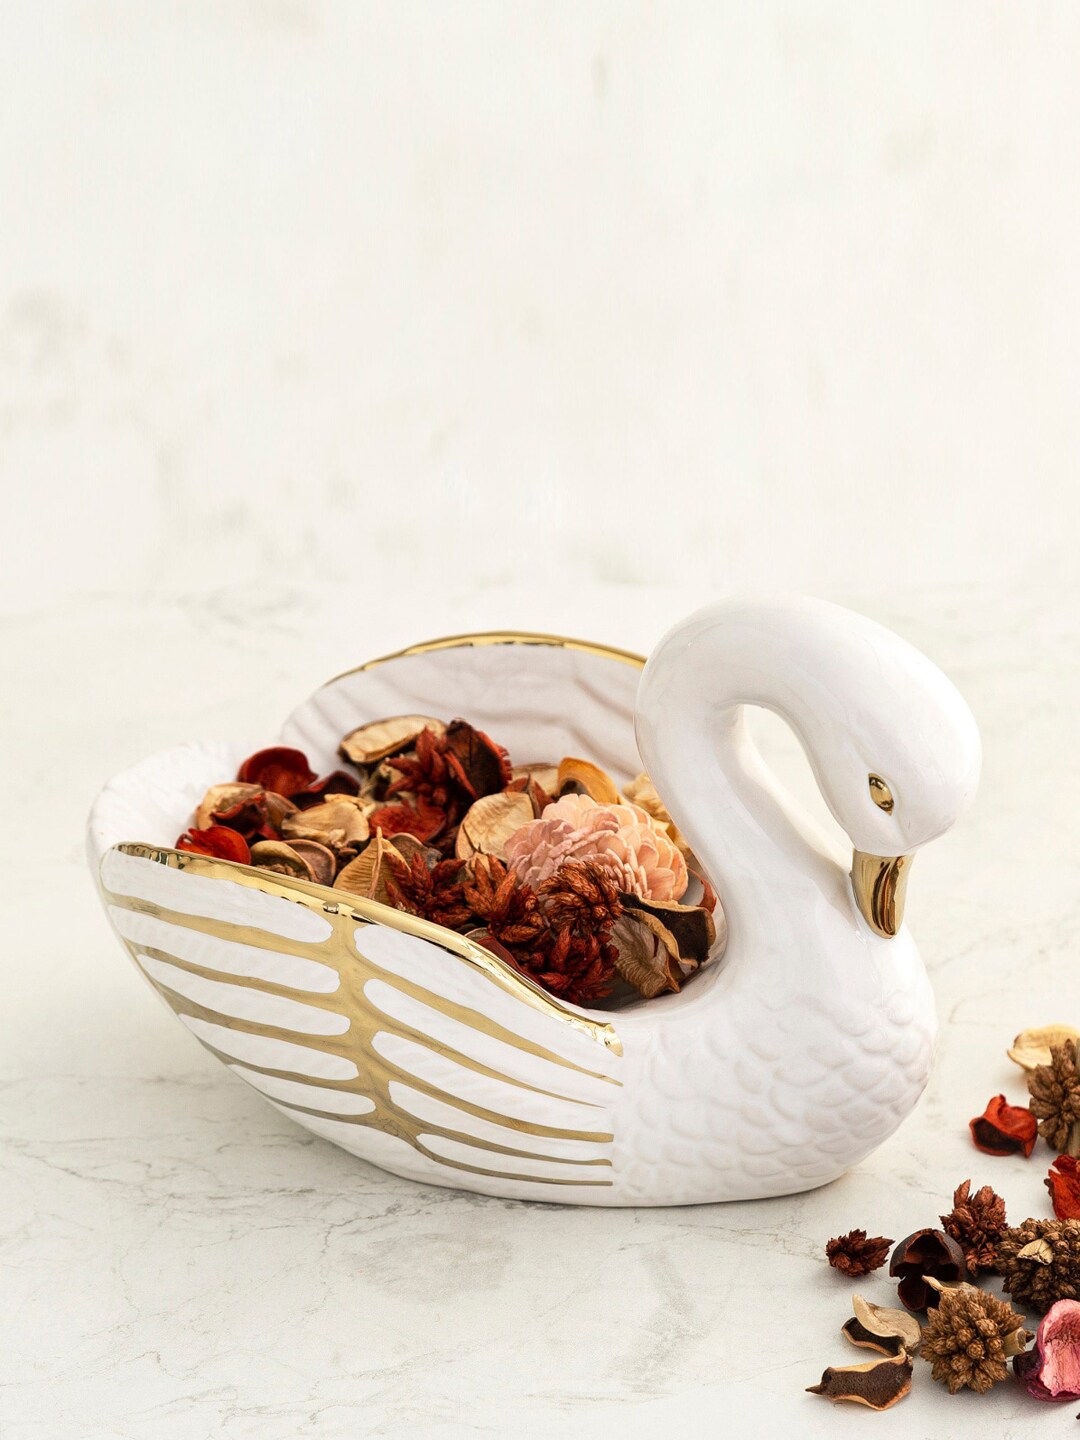 Home Centre White & Gold-Toned Porcelain Swan Figurine Price in India